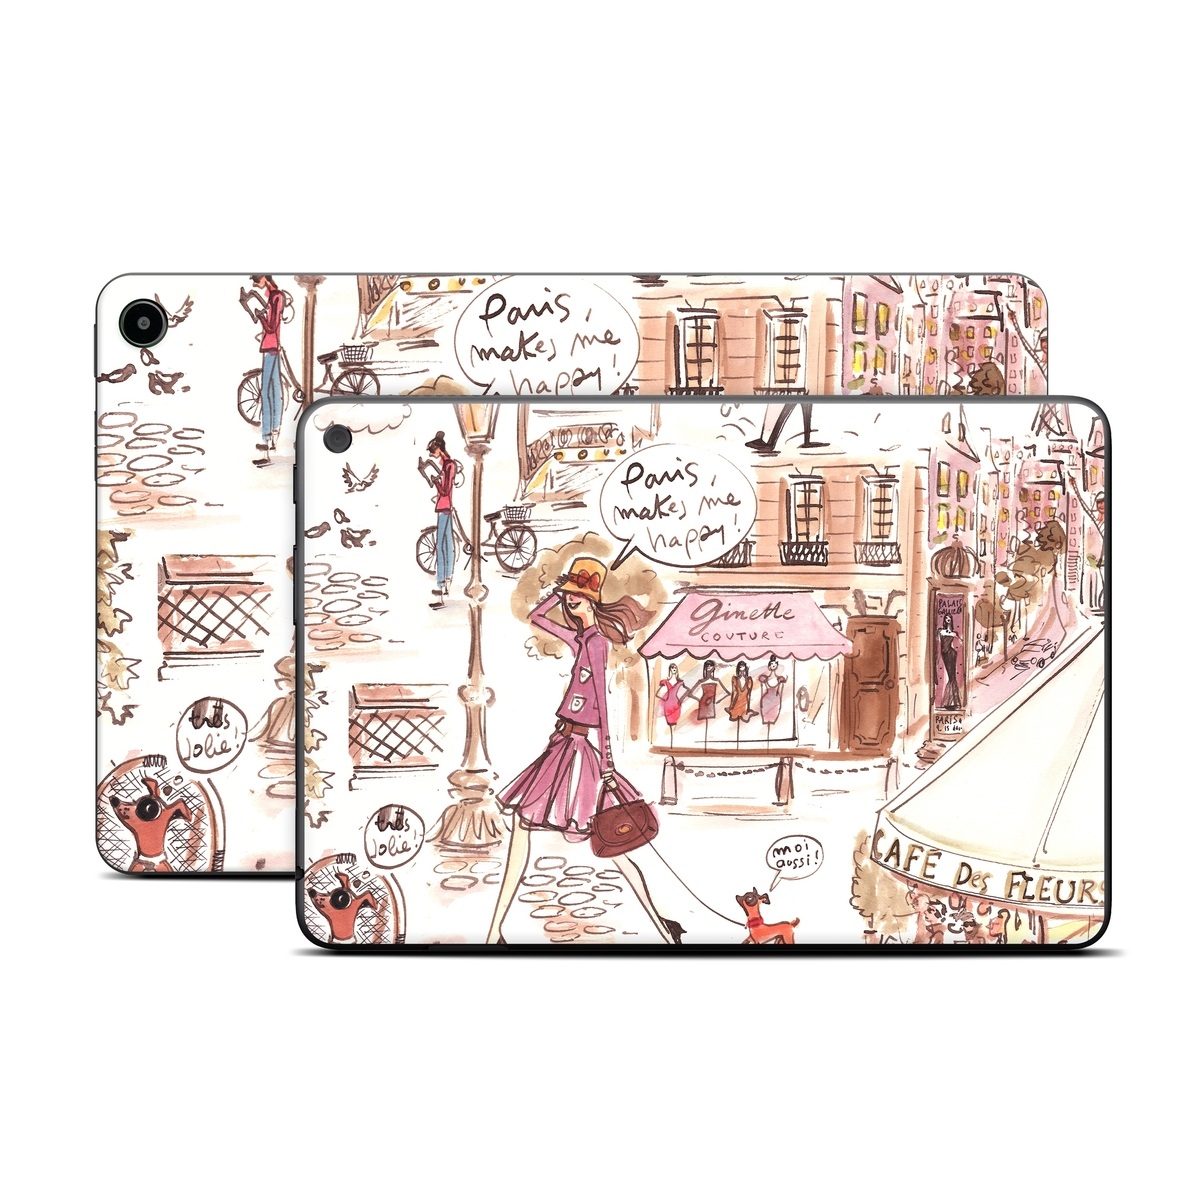 Amazon Fire Tablet Series Skin Skin design of Cartoon, Illustration, Comic book, Fiction, Comics, Art, Human, Organism, Fictional character, Style, with gray, white, pink, red, yellow, green colors